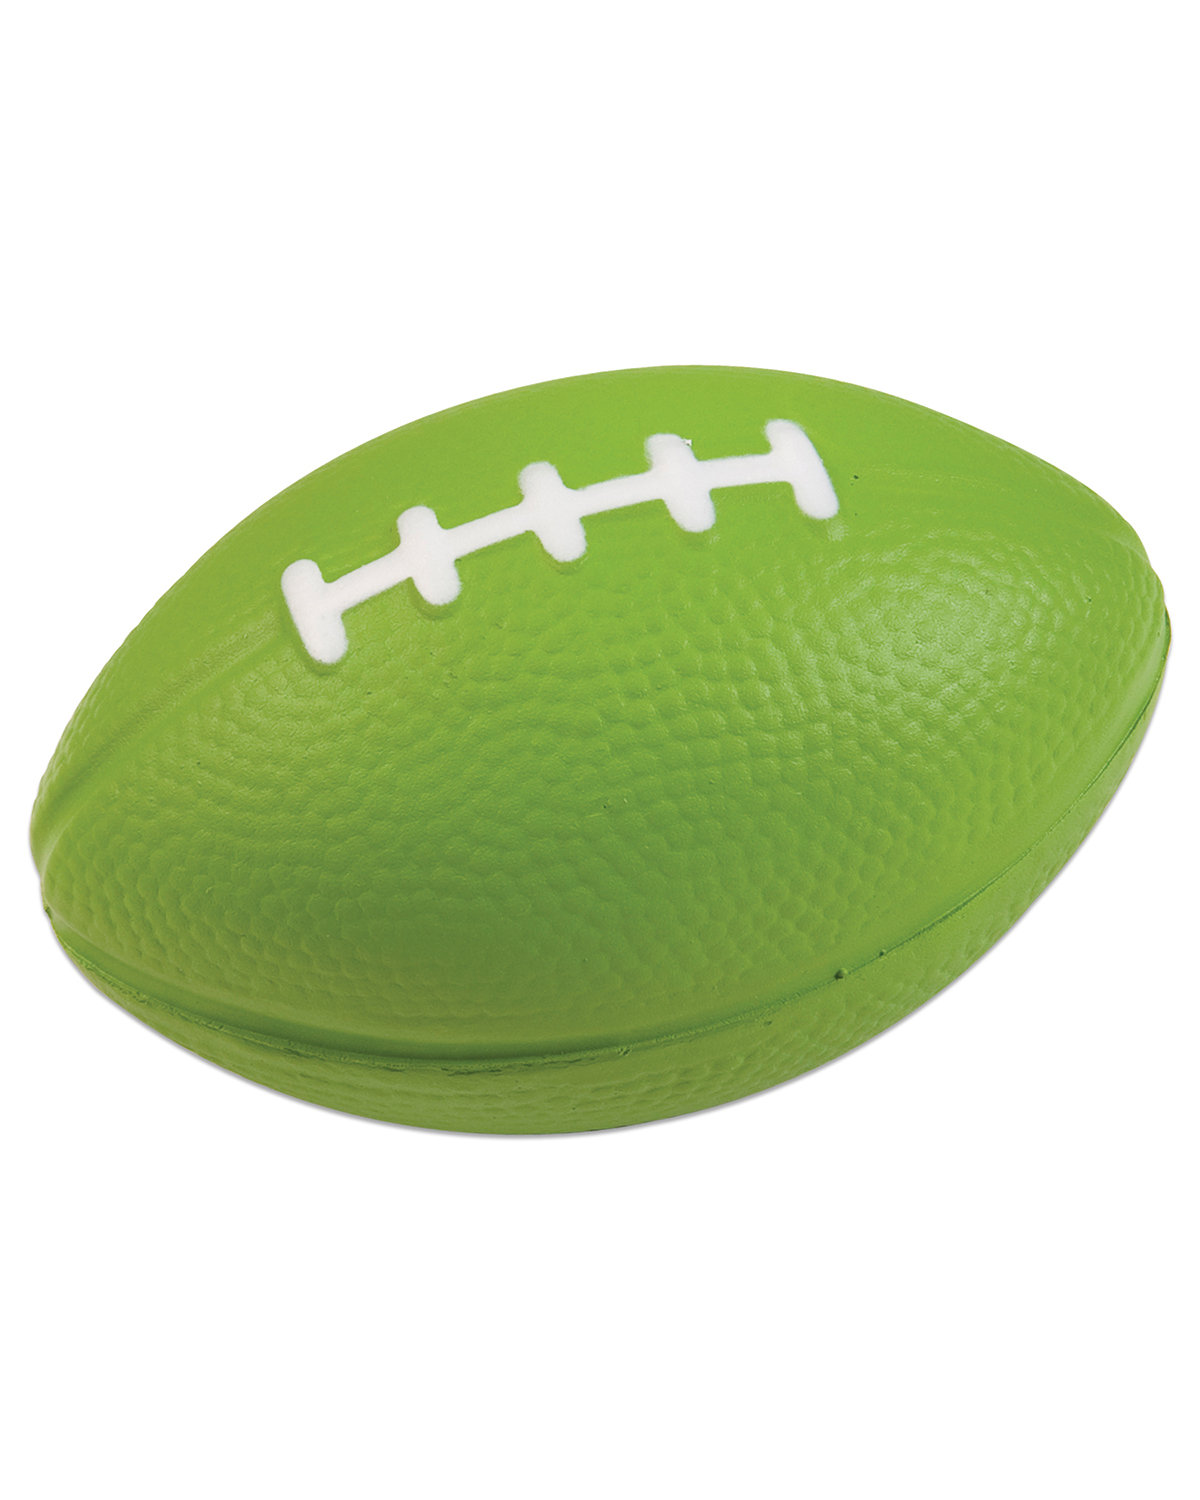 Prime Line Football Stress Reliever 3" lime green 